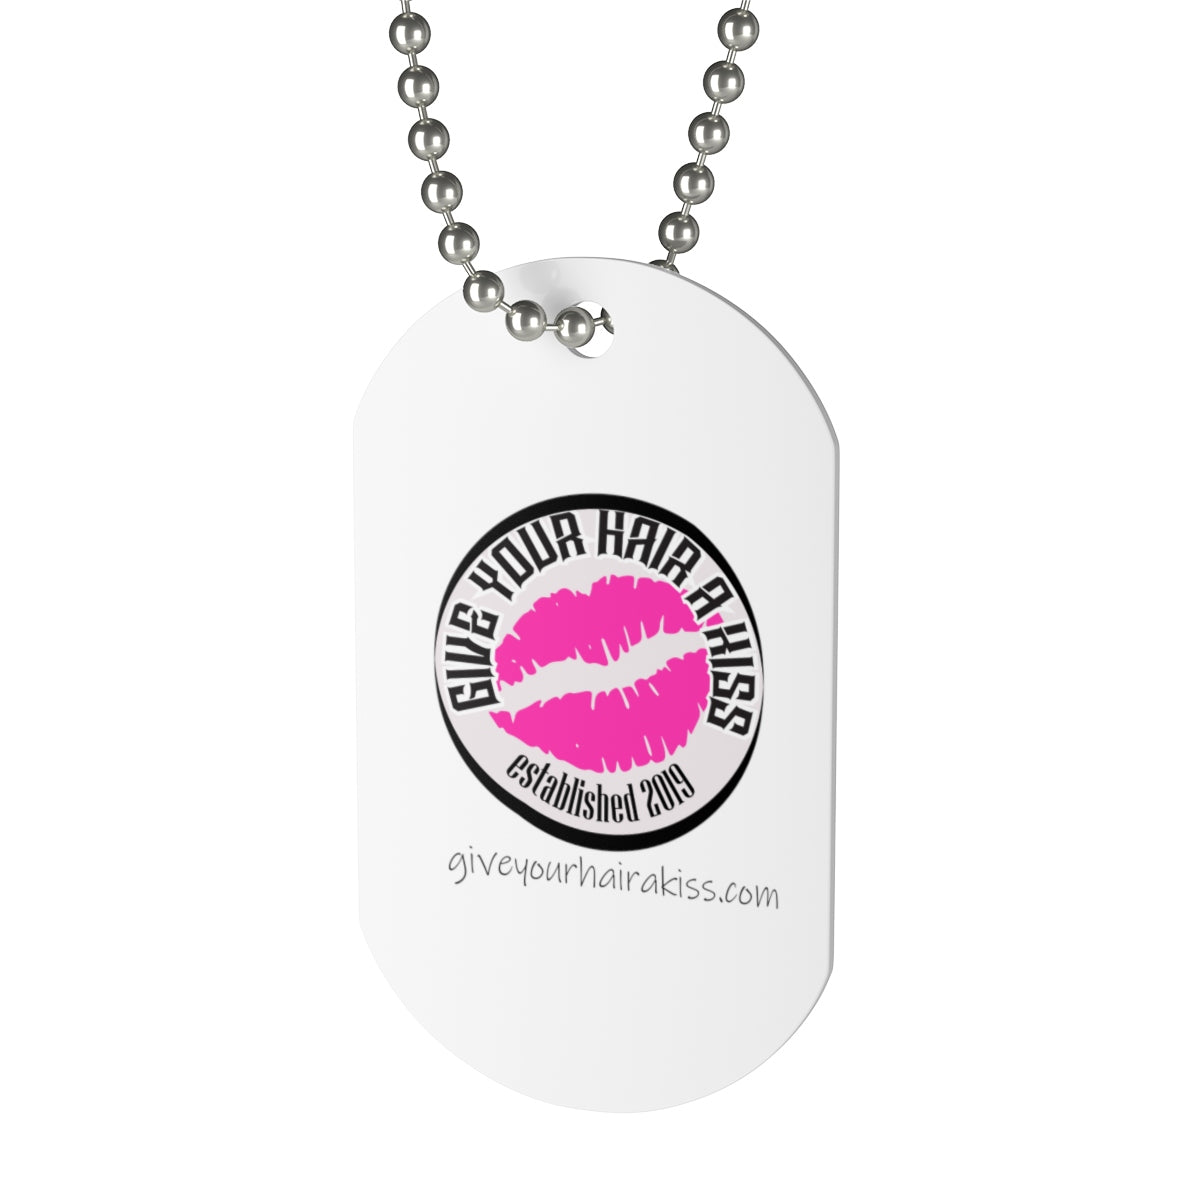 GIVE YOUR HAIR A KISS - Dog Tags - Give Your Hair a Kiss